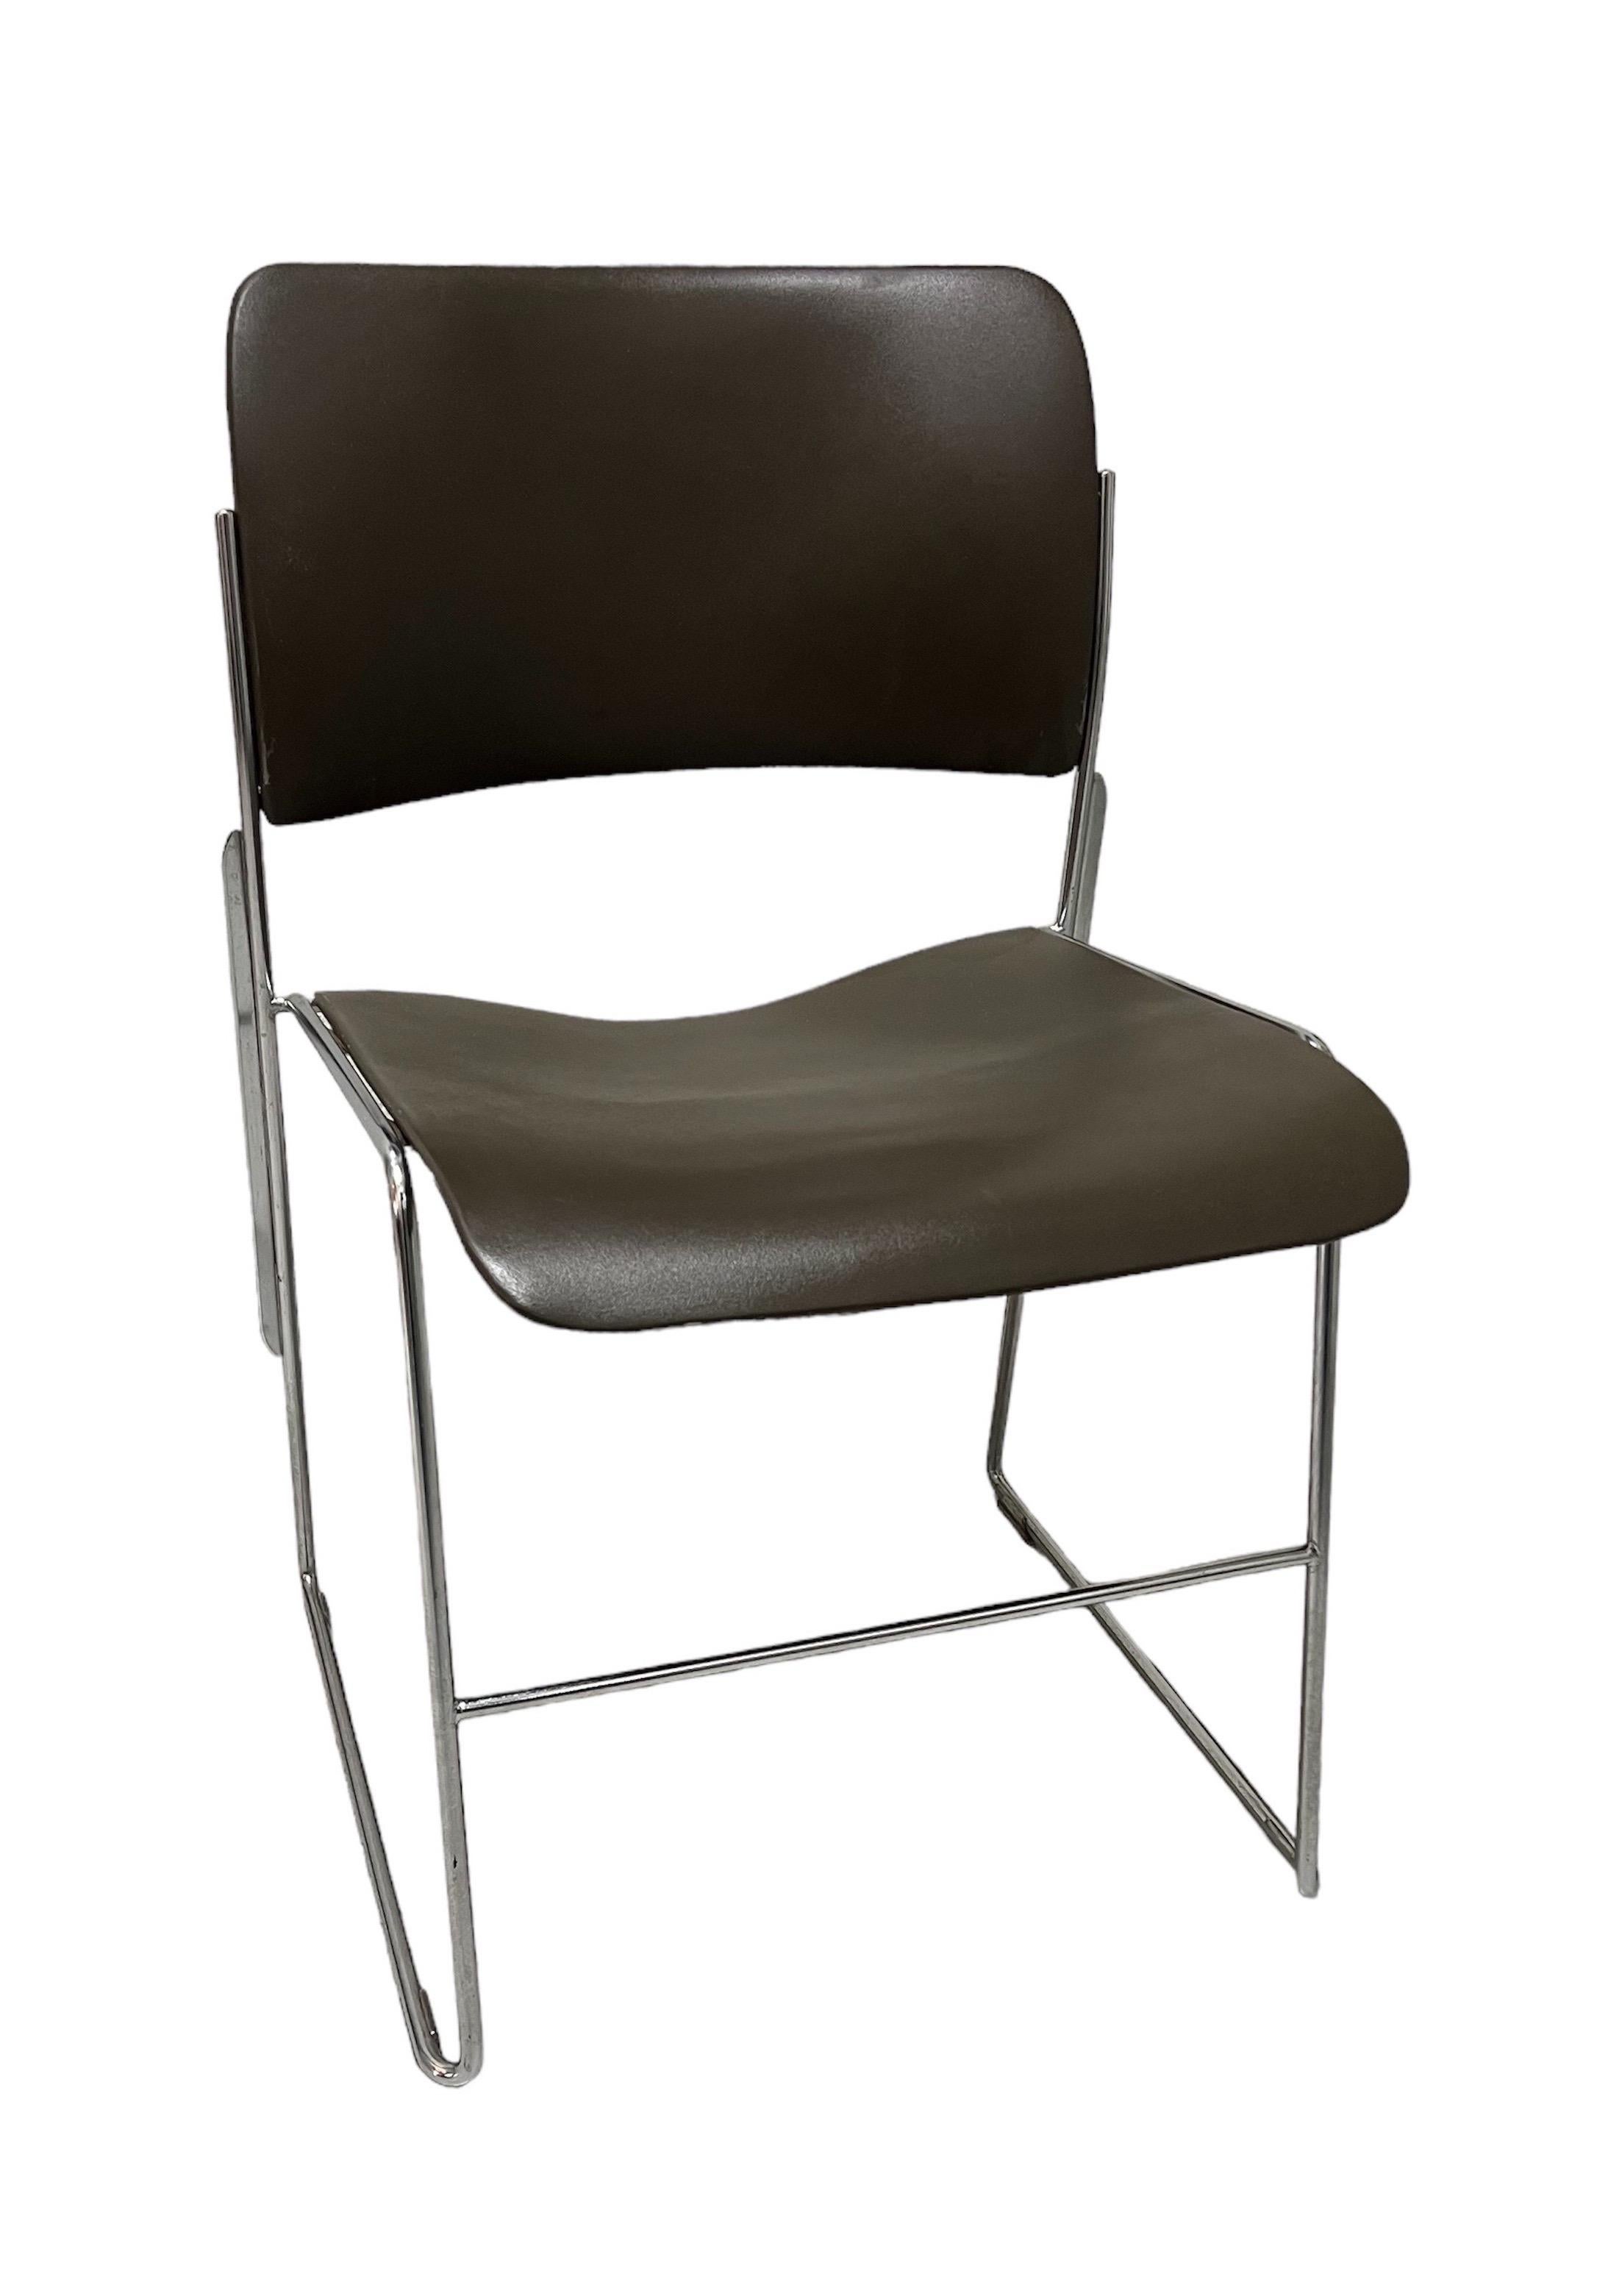 American Set of 4 Stackable 40/4 Chairs By David Rowland in Dark Brown For Sale